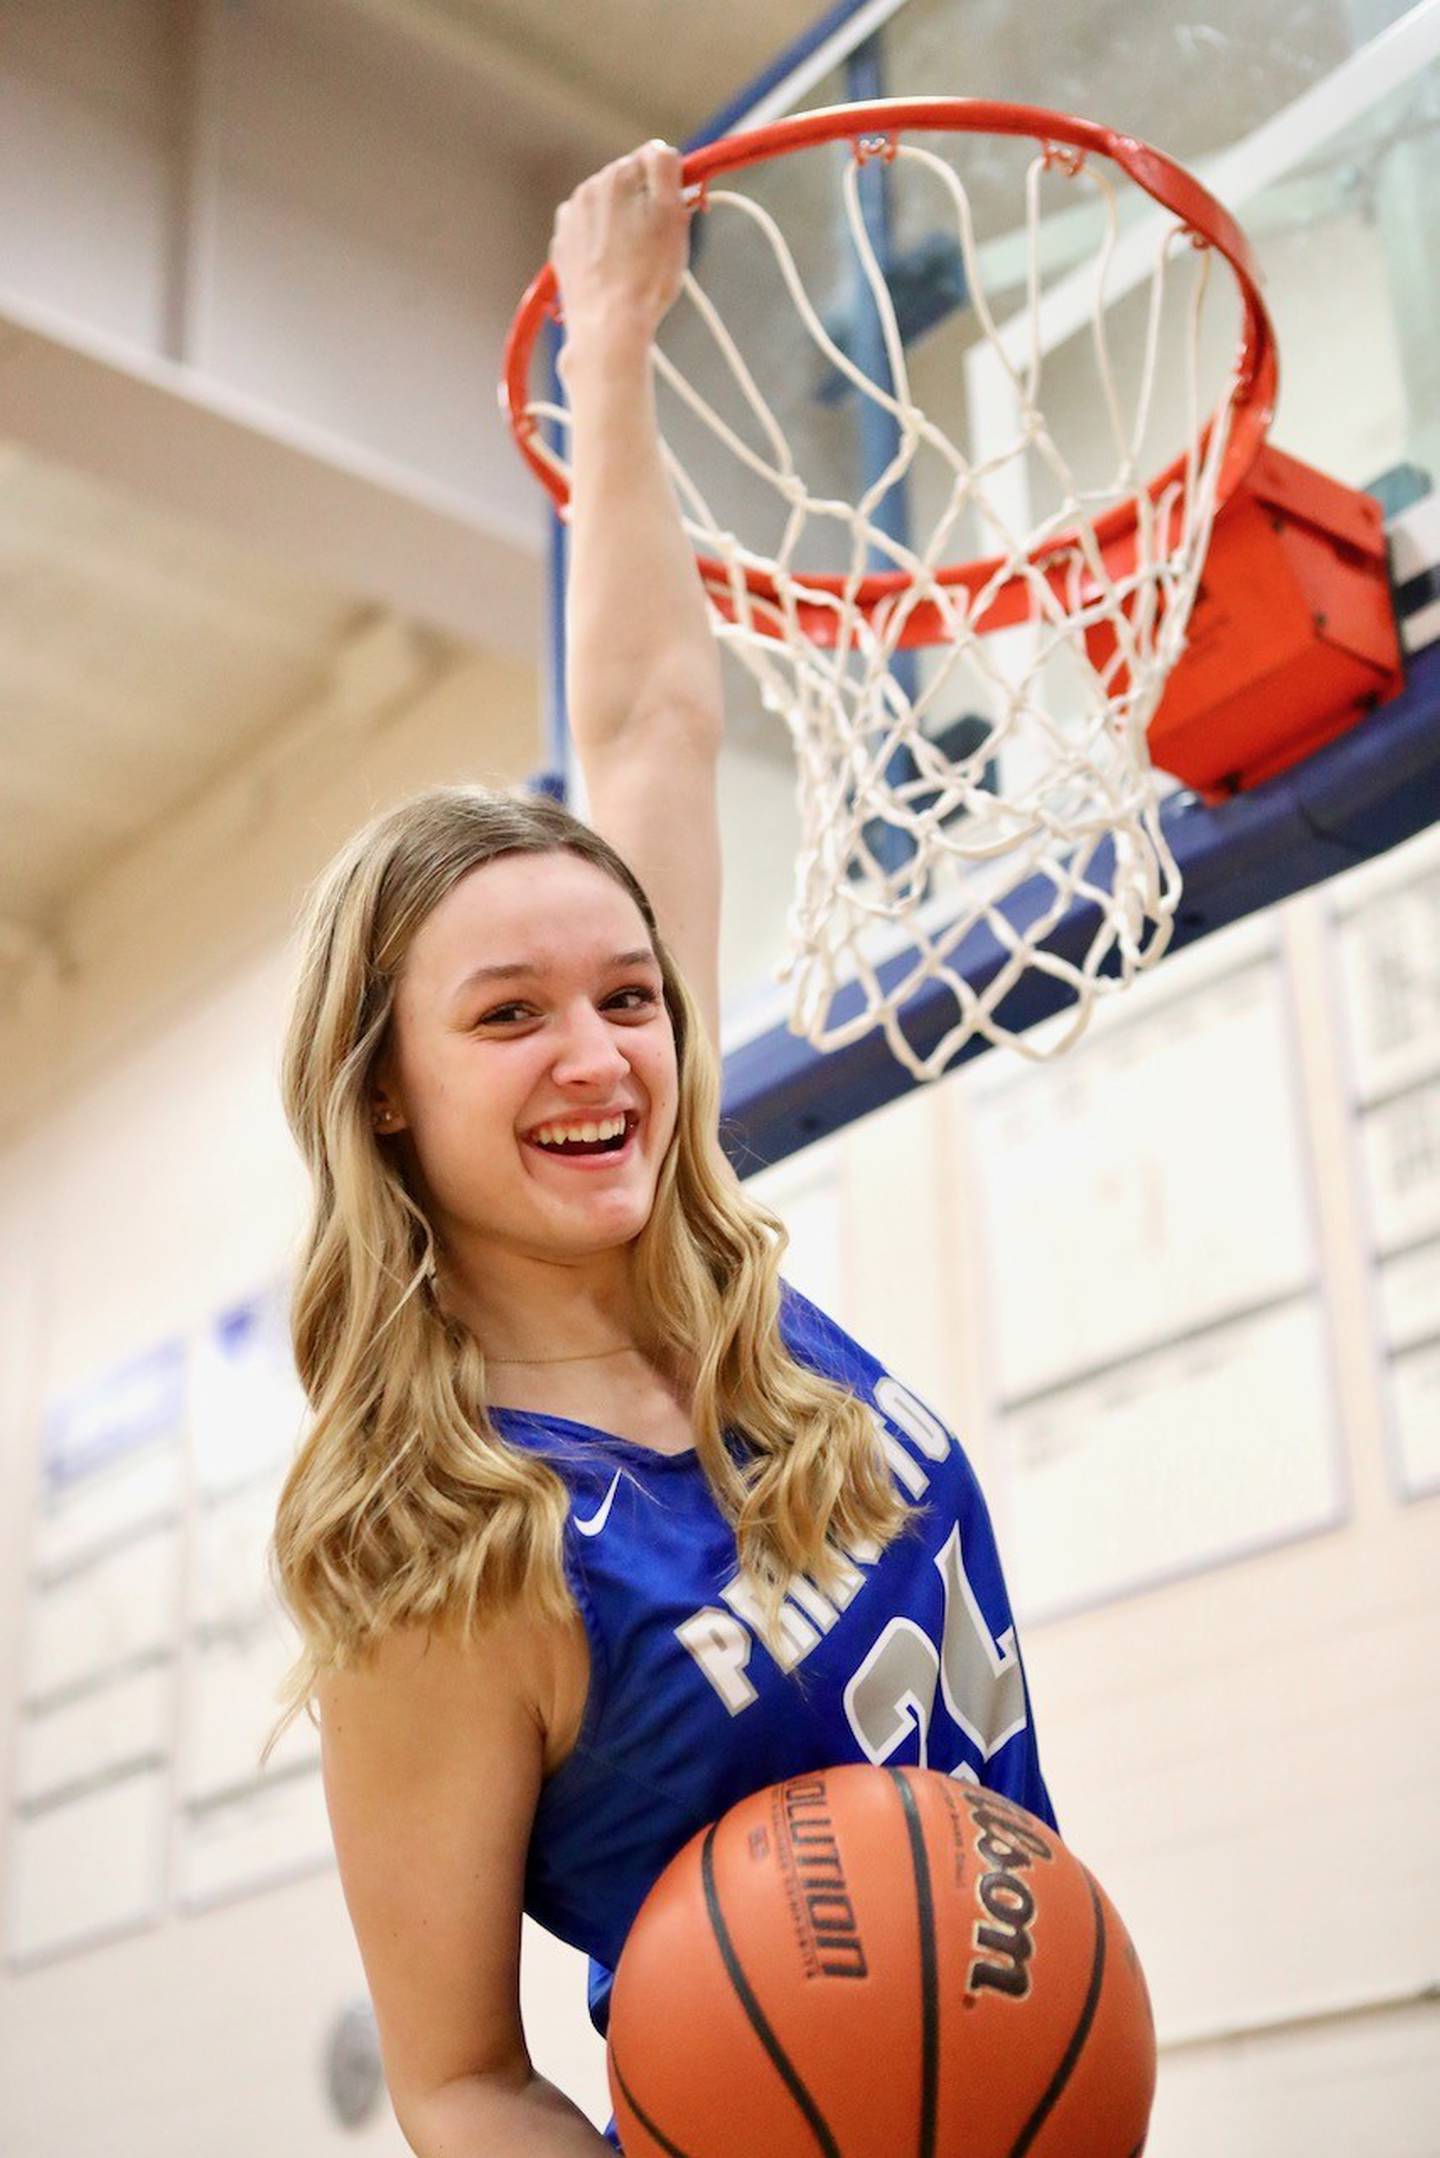 Keighley Davis wanted to show she can play at the rim just like her brother, Teegan.